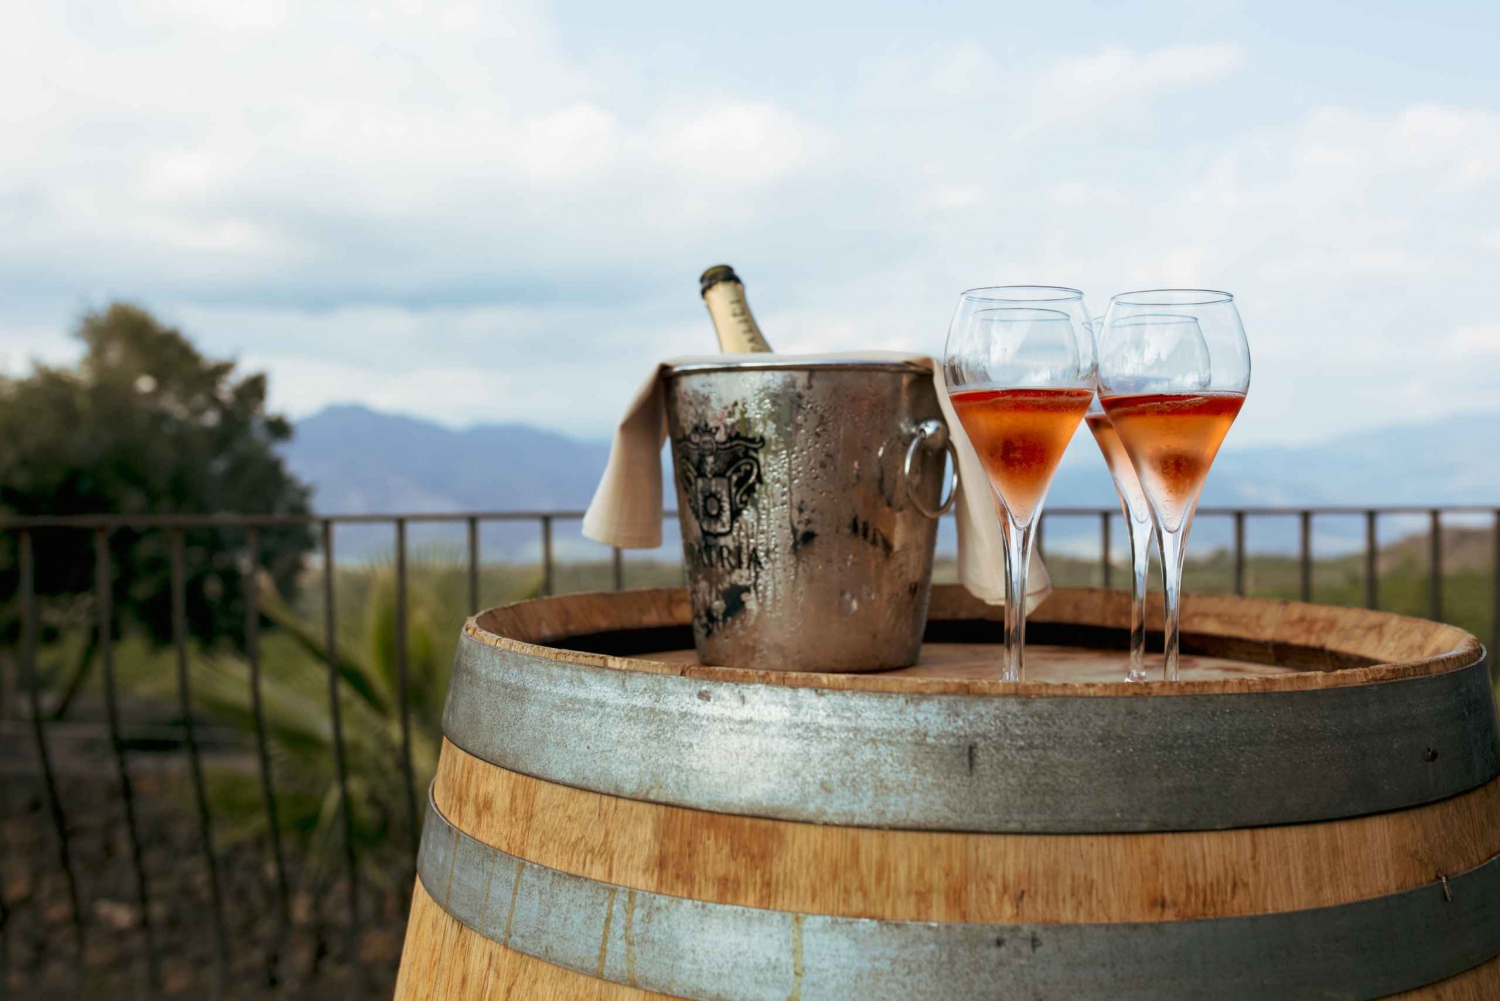 Mount Etna Food and Wine Tasting Tour